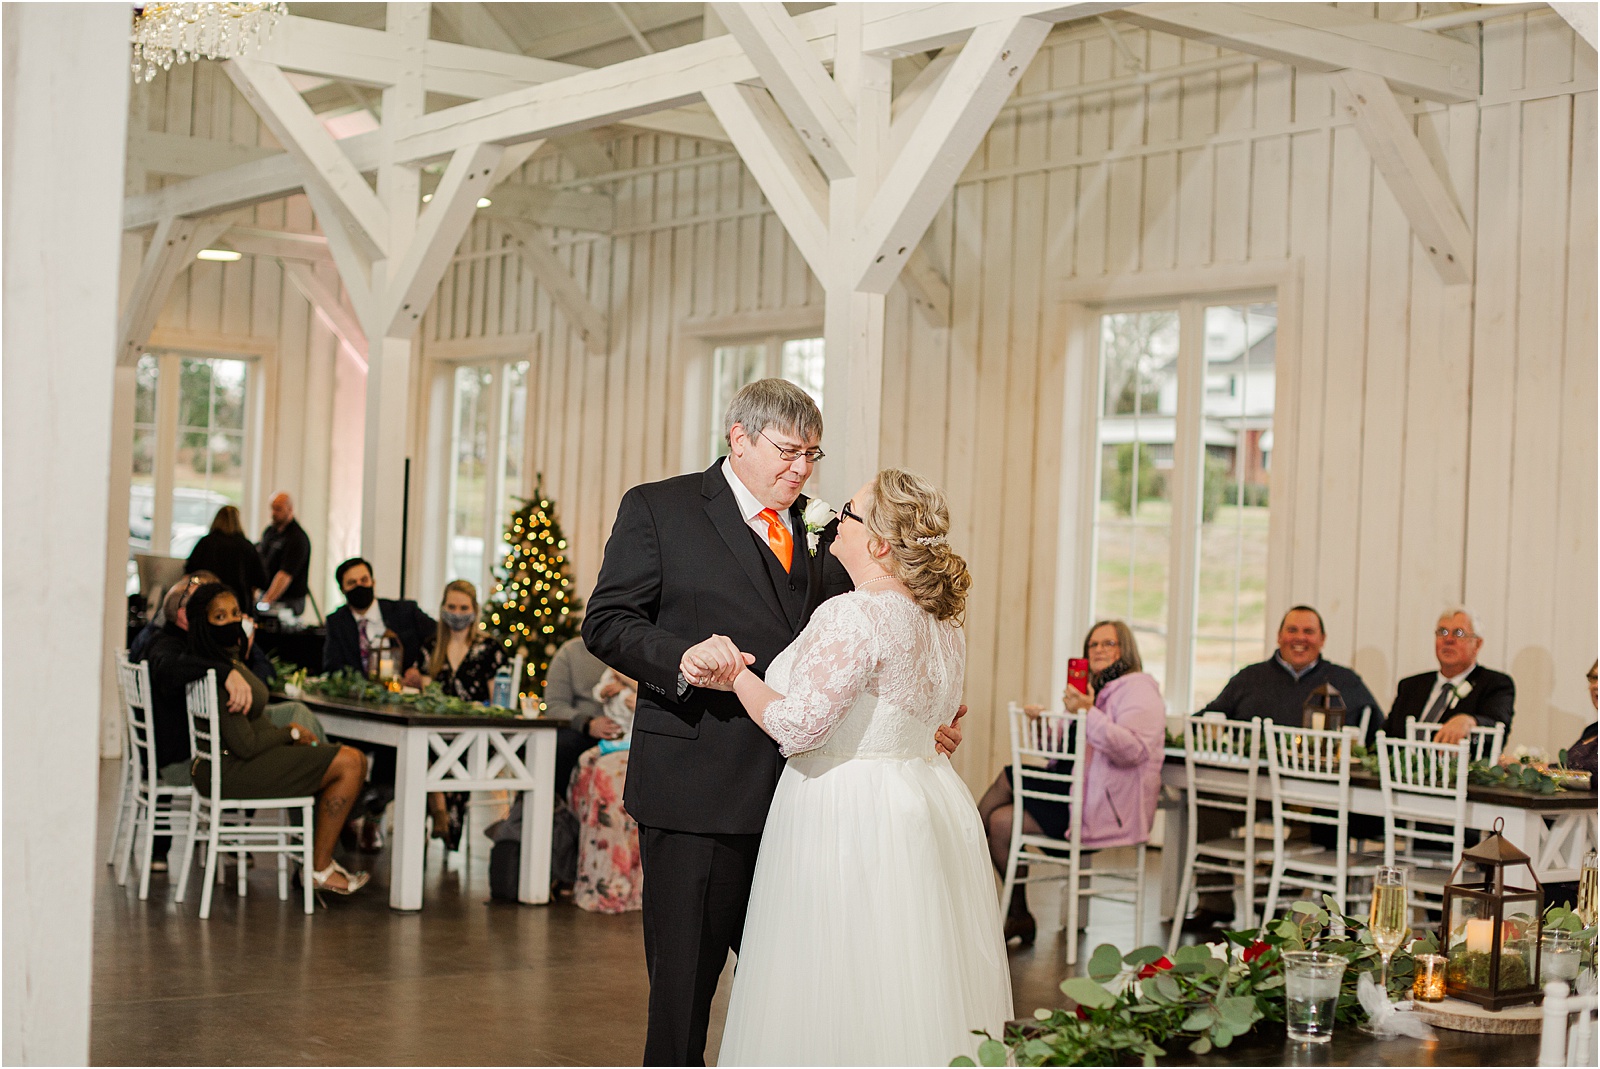 First dance of husband and wife at Aurora Farms white barn venue